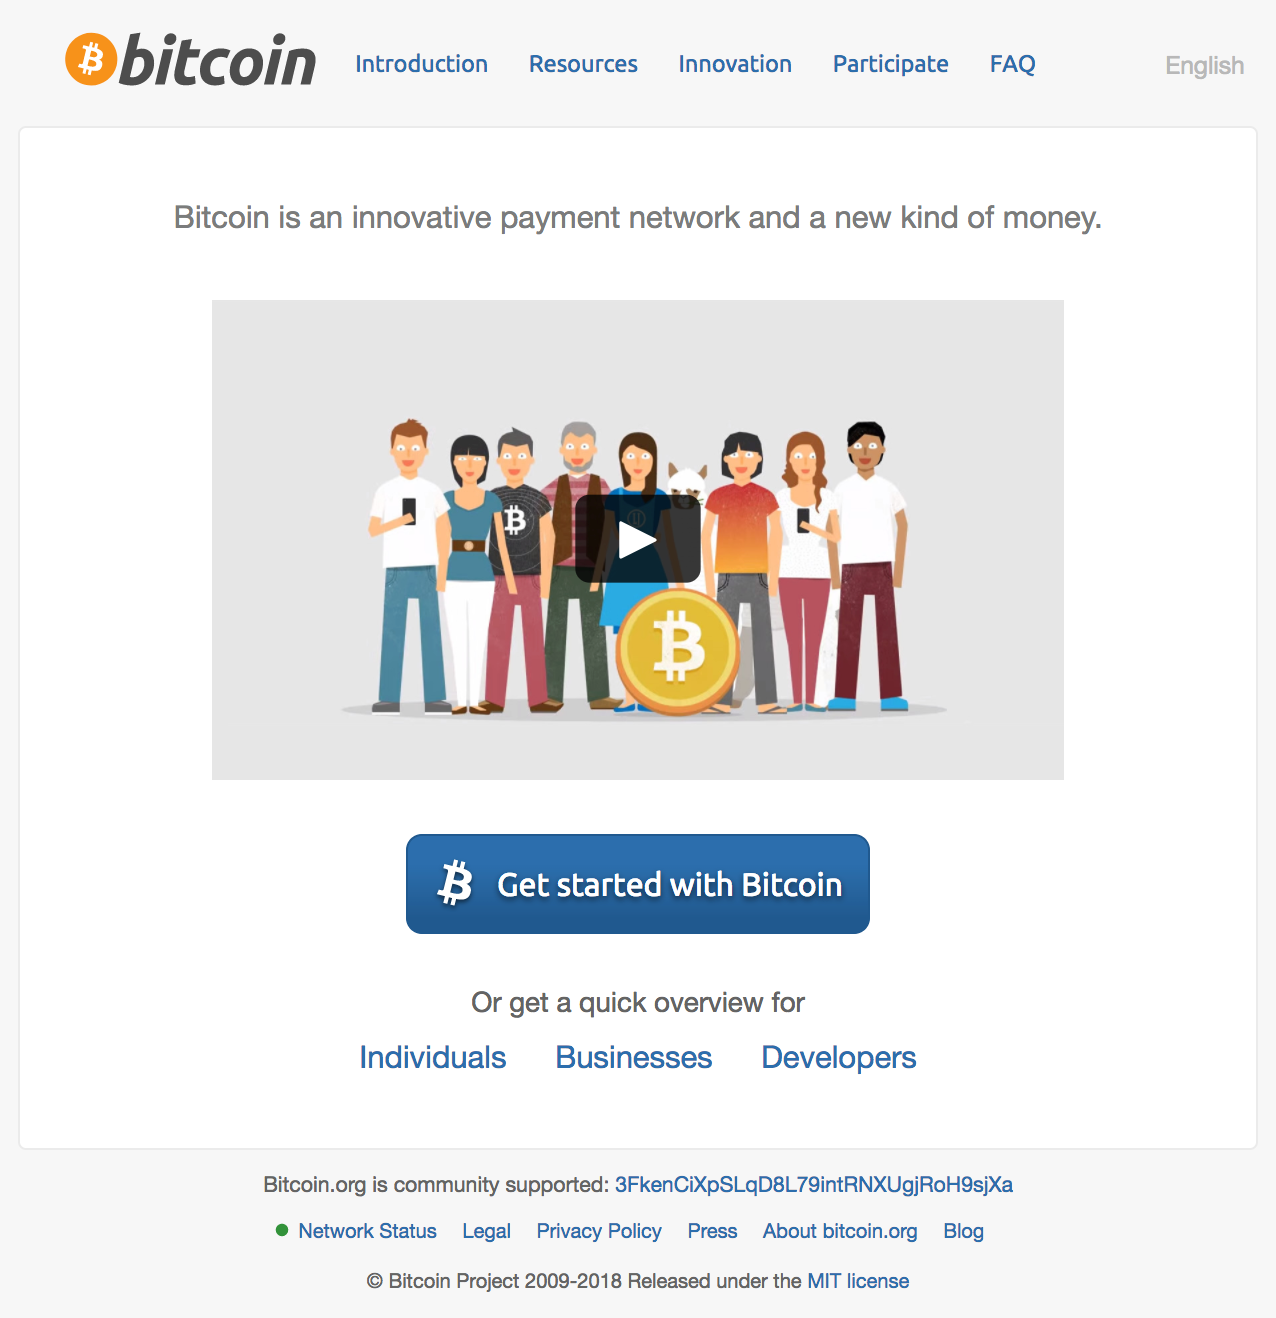 Redesigning Bitcoin.org